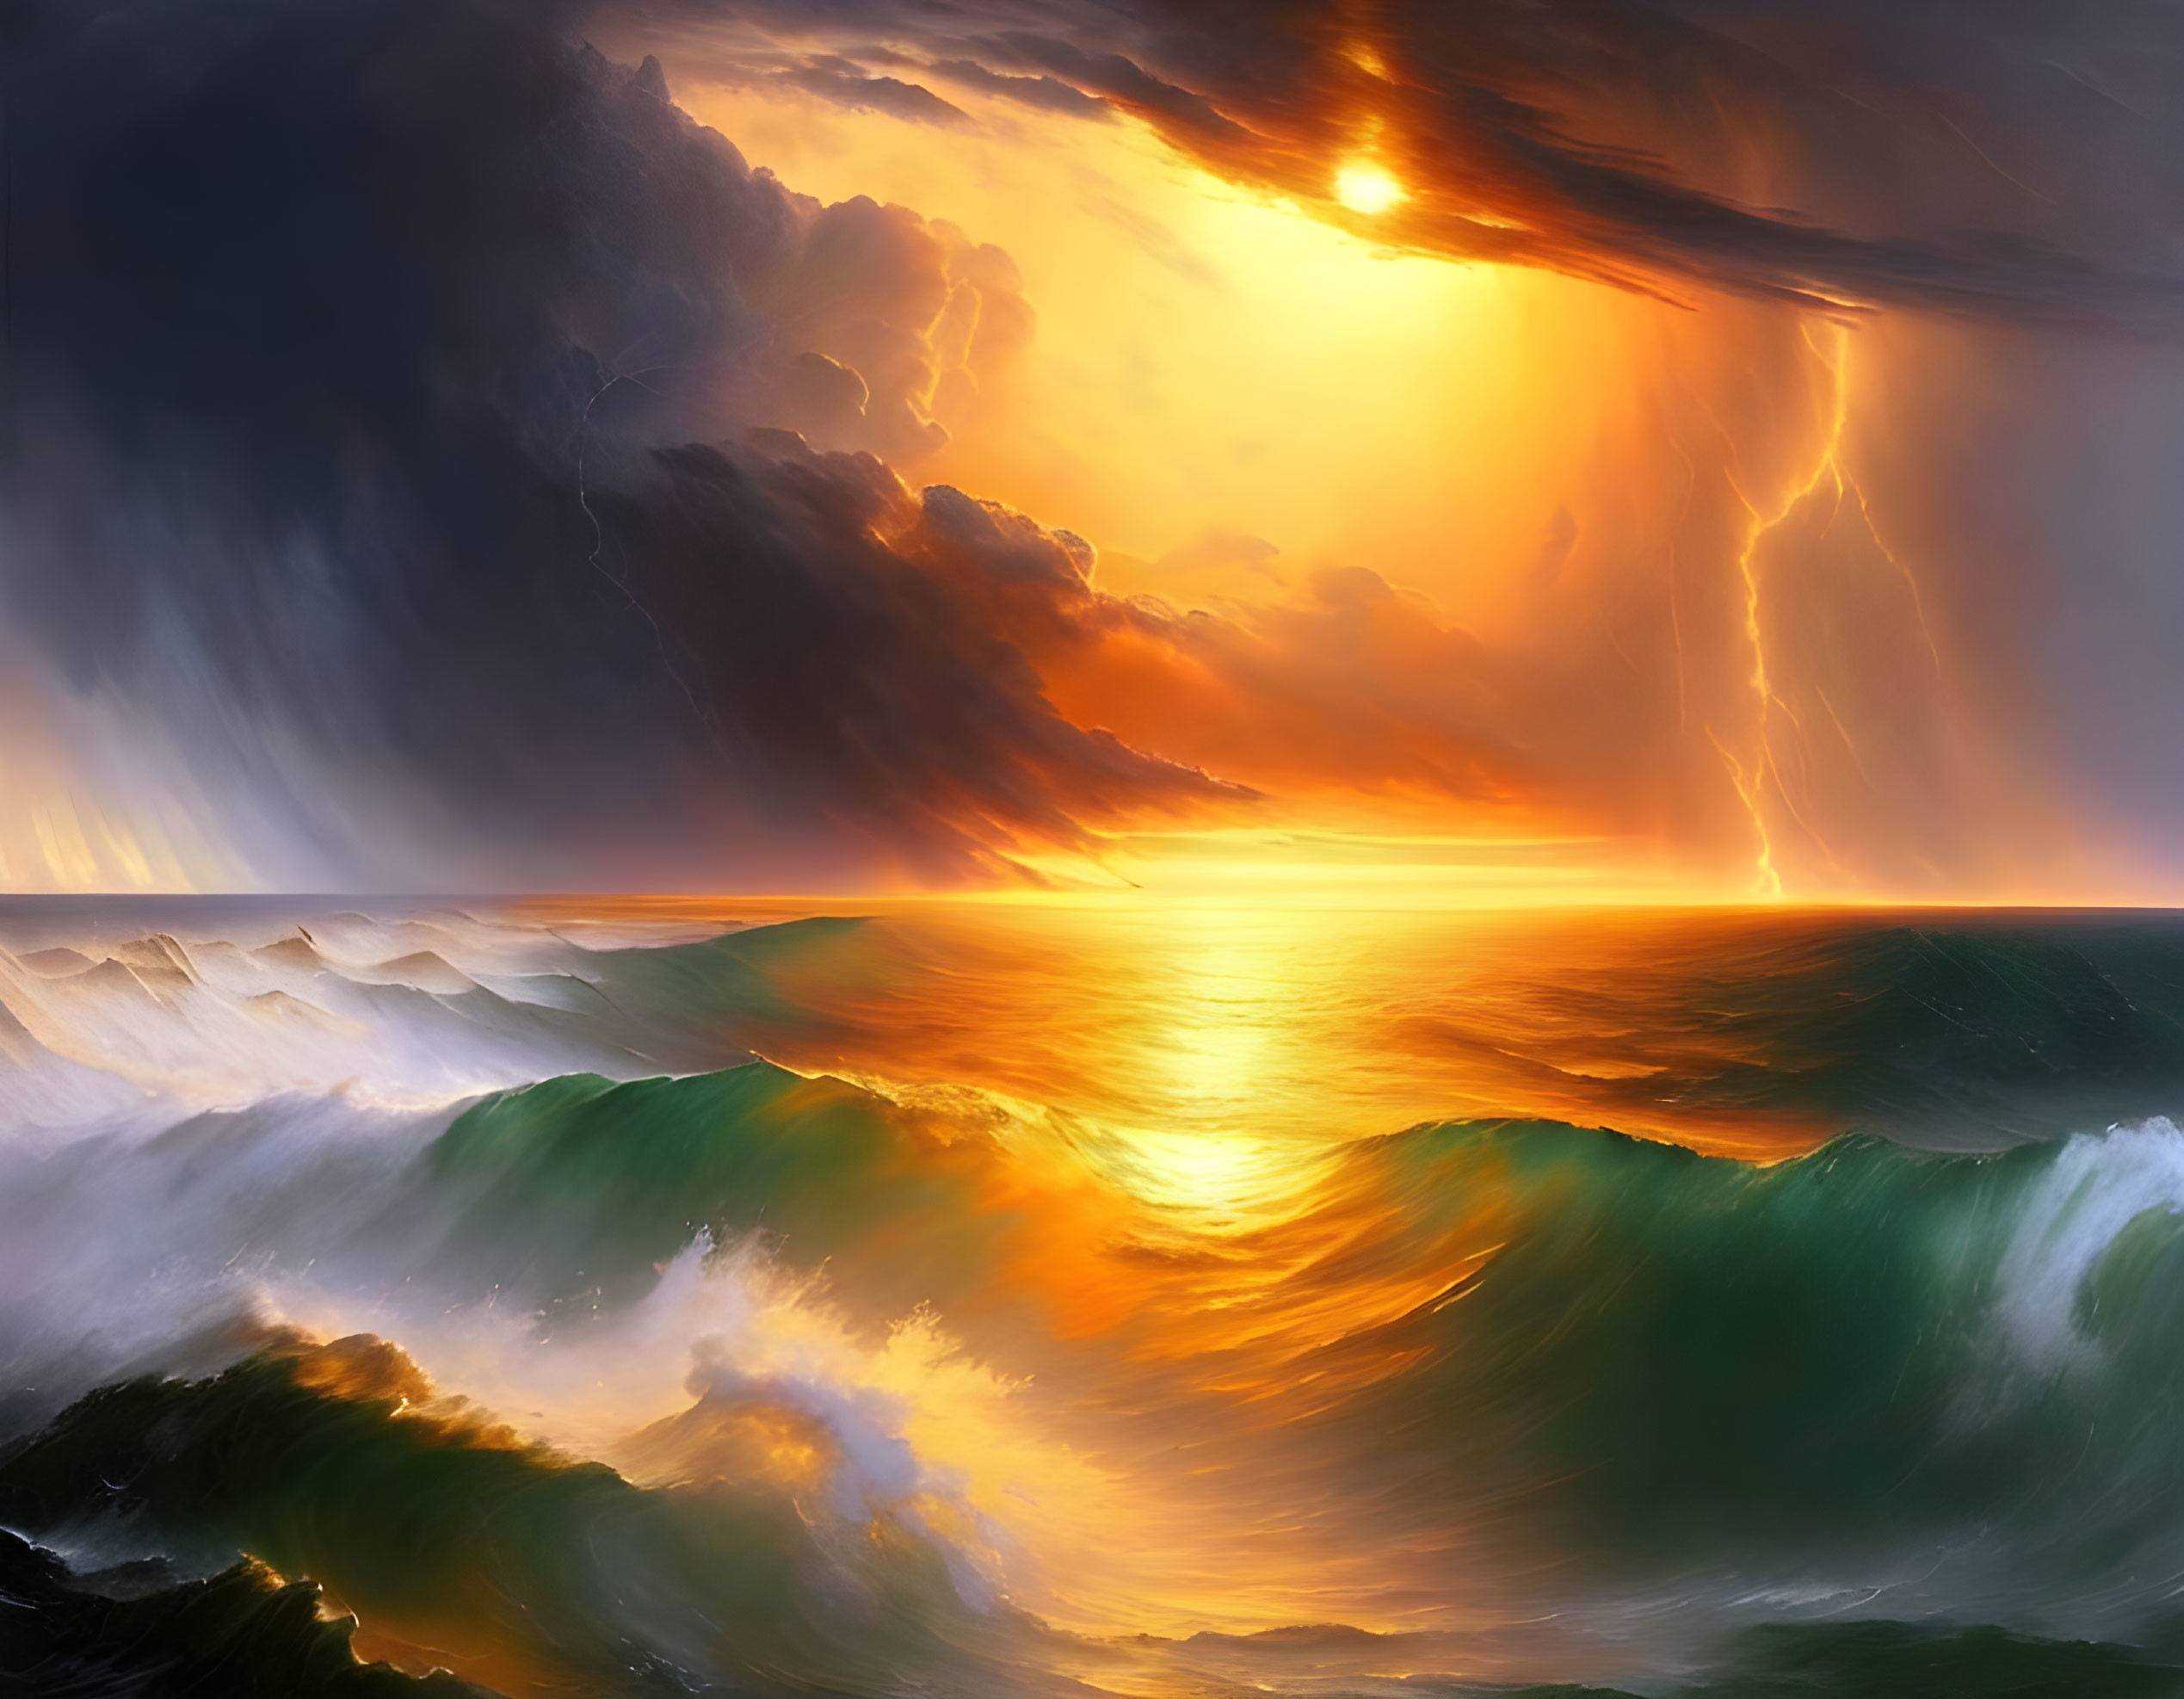 Dramatic seascape with towering waves, fiery sunset, storm clouds, and lightning